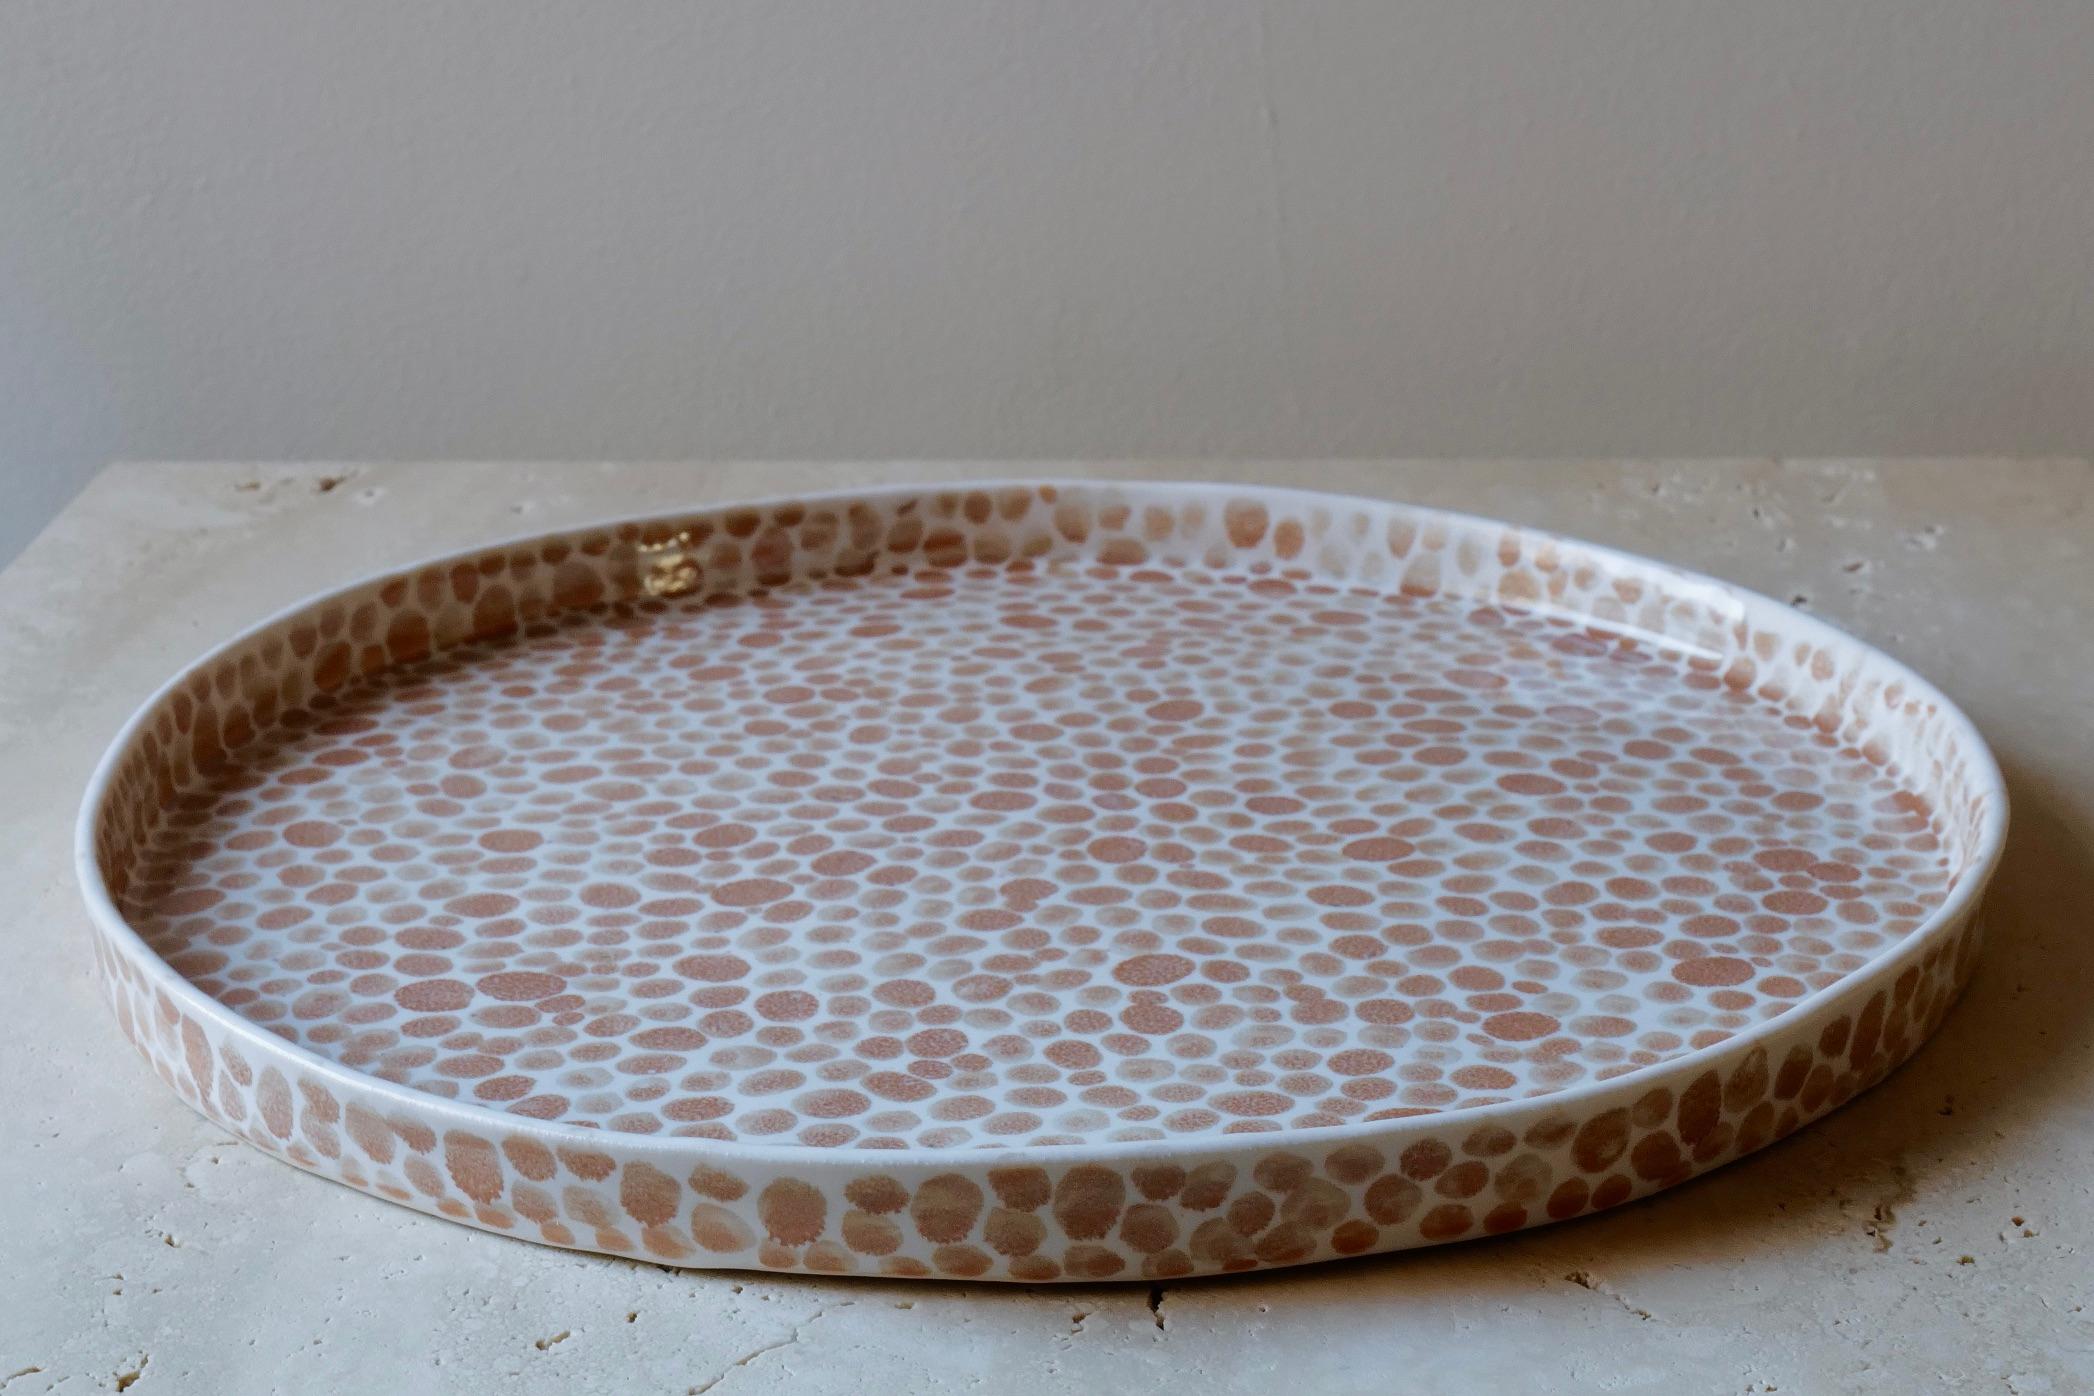 Large ceramic tray or serving platter. Hand-cast in porcelain and once bisque fired, each dot is hand-painted with a tan glaze. An unconventional layered glazing technique, developed by the artist, is used in these cast porcelain pieces. The